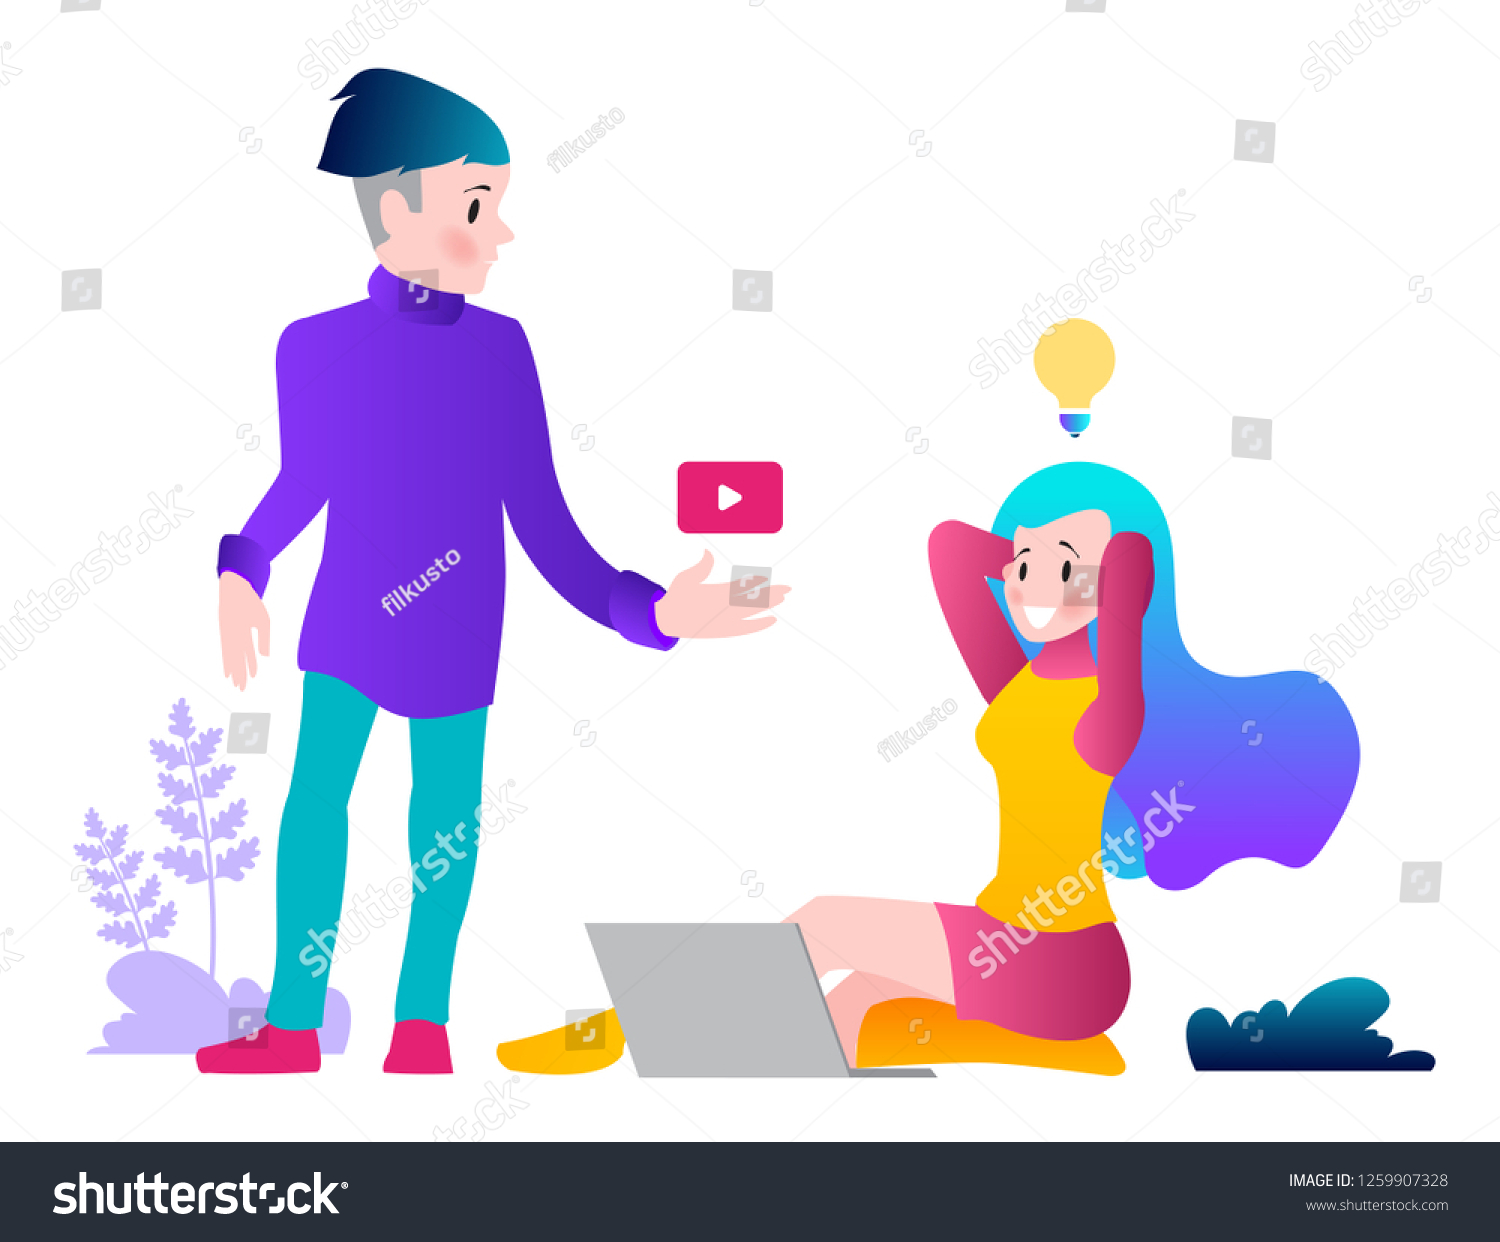 Vector illustrations concept of distance education, online courses, webinars, trainings. Modern flat design for online advertising, web banners and much more. #1259907328